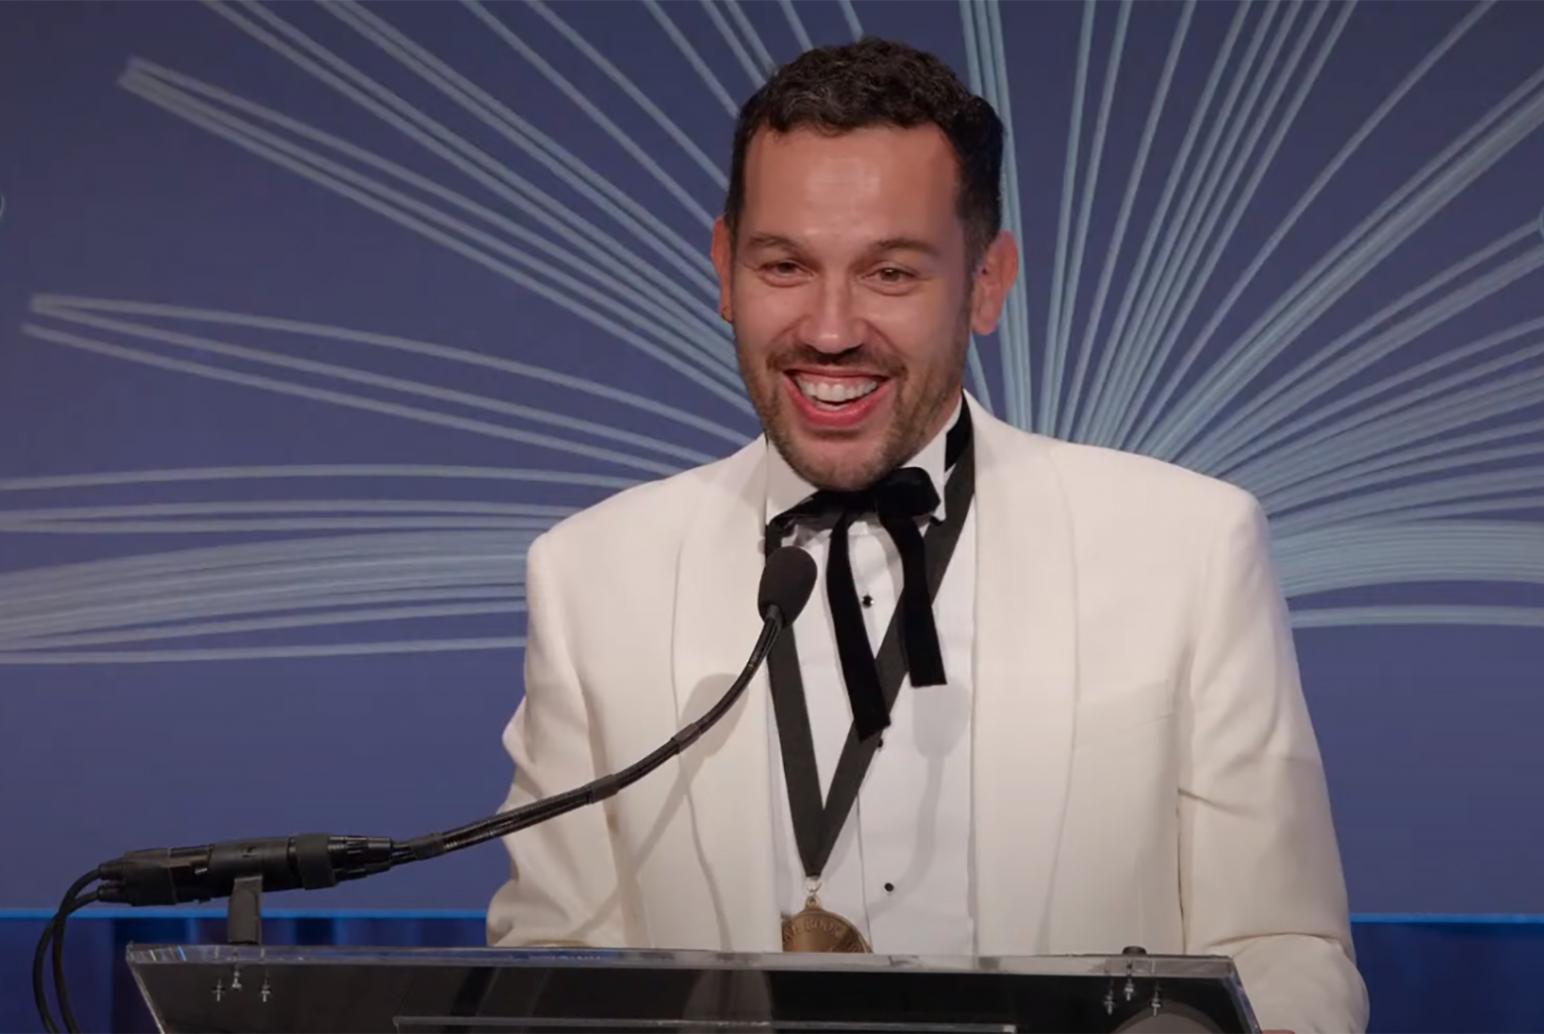 Justin Torres at podium in a white jacket giving speech at National Book Awards ceremony